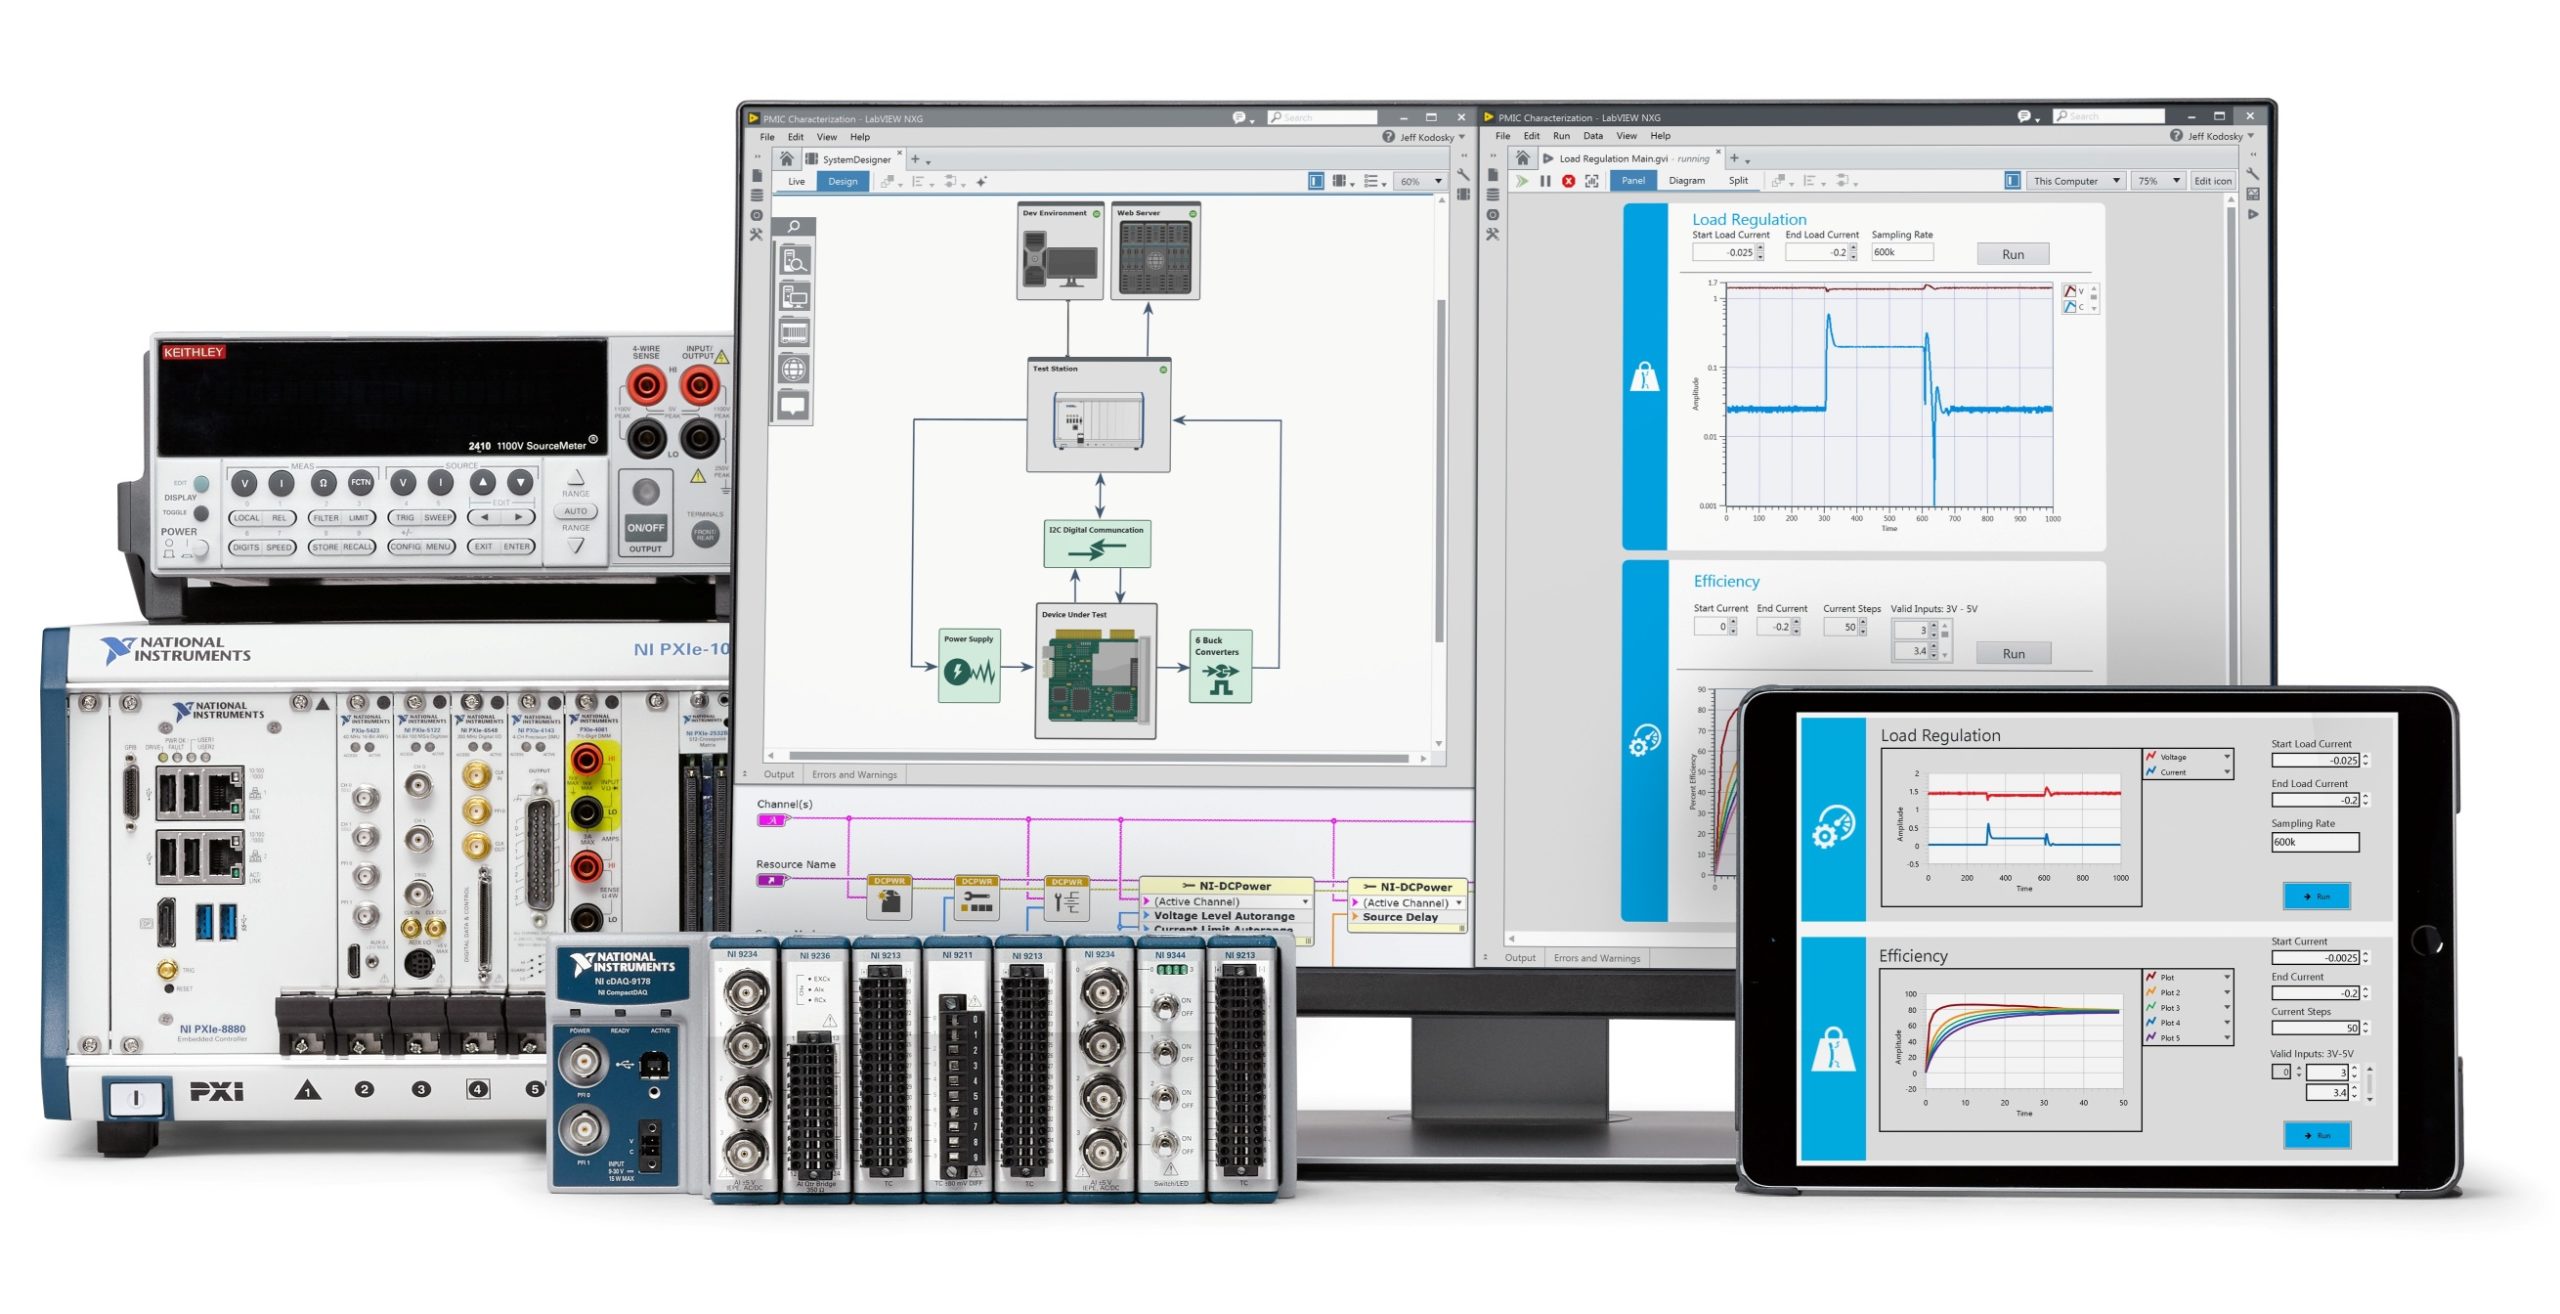 LabView and LabView NXG are now available as free community editions